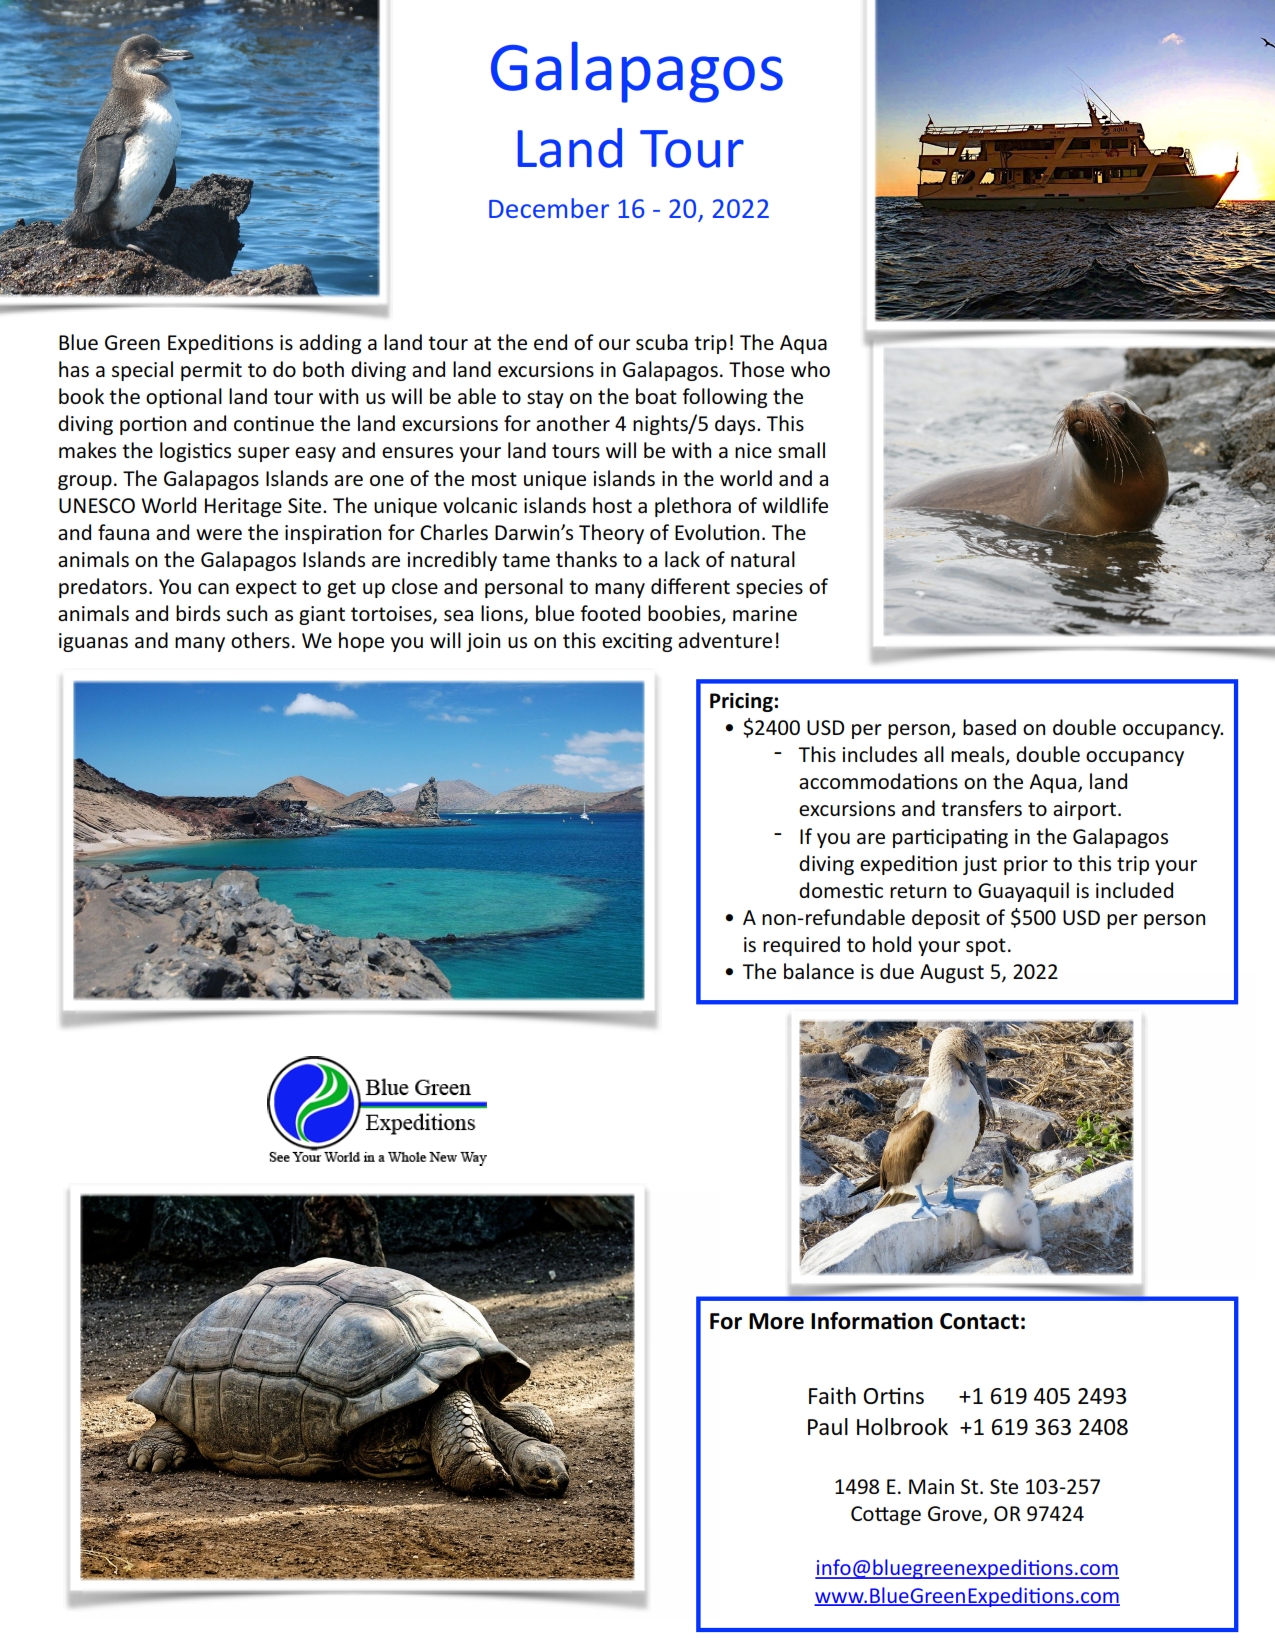 Galapagos Land Tour, December 16 - 20, 2022, trip itinerary and pricing. Same information is available in the expedition flyer PDF.